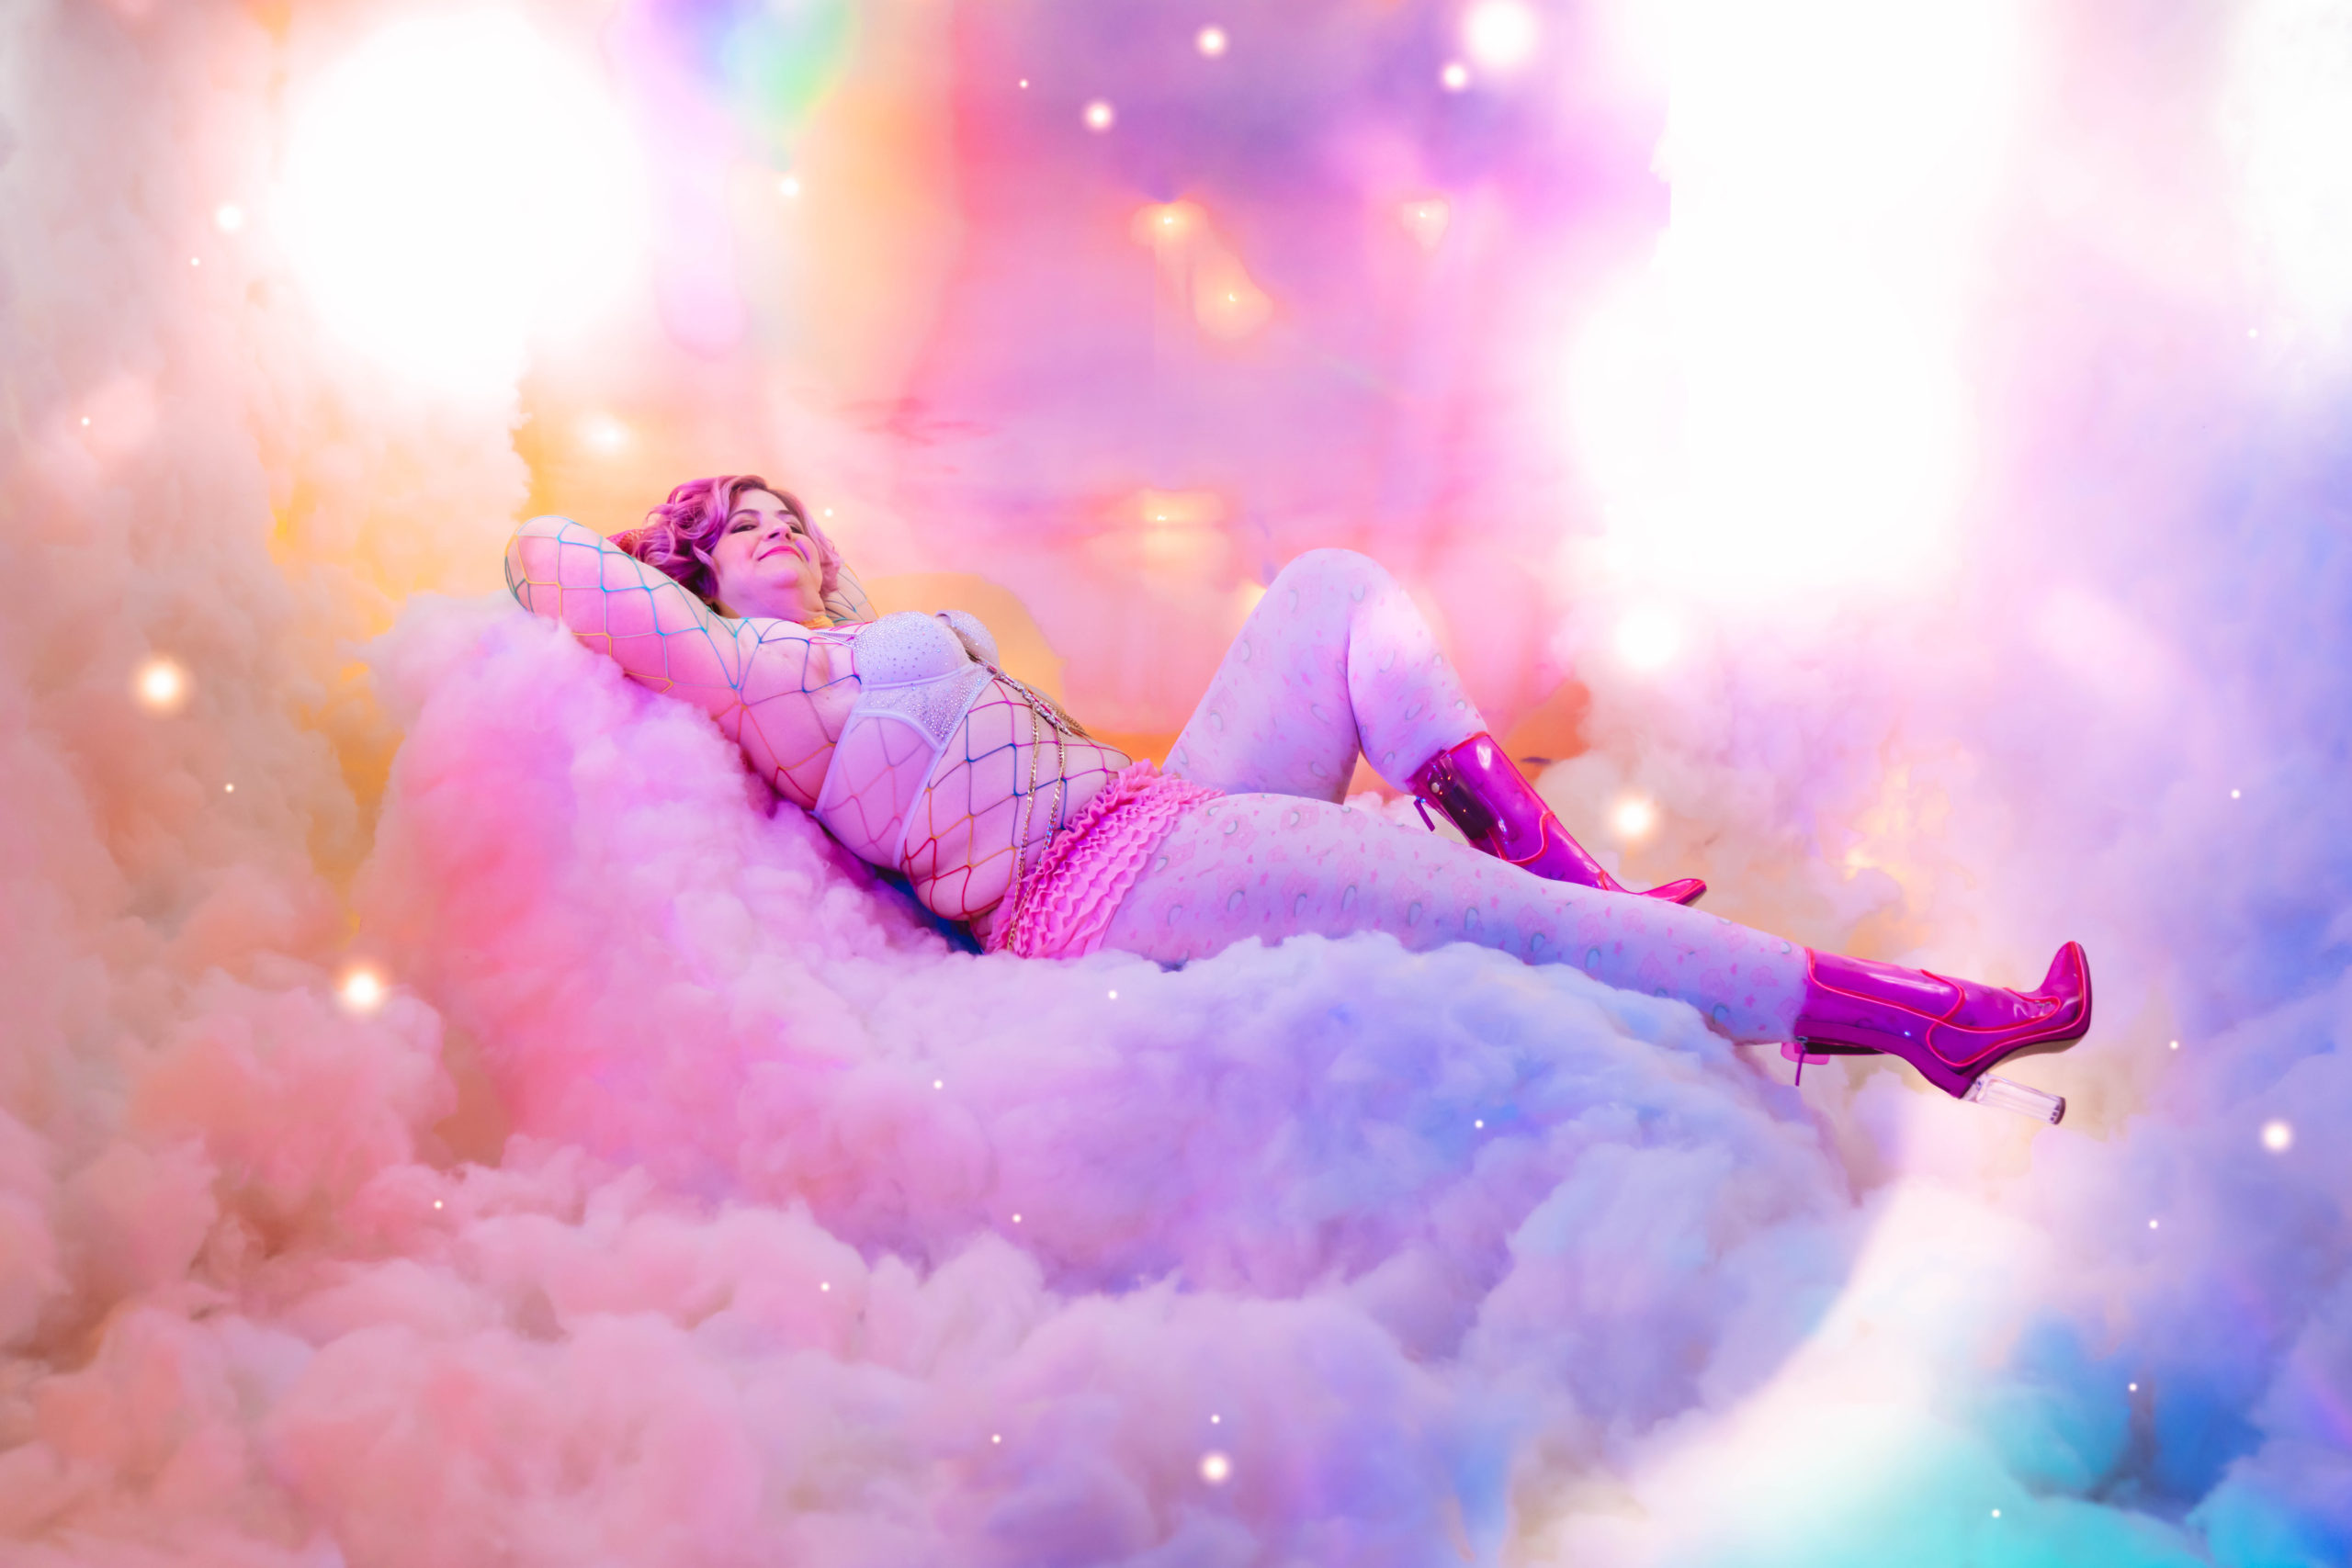 Sweet Dream Cloud Heaven Dreamy Aesthetic Boudoir Twinkly Lights Sparkle Glam Boudoir Glamour Sexy 80s Technicolor Rainbow Napping Happy Woman